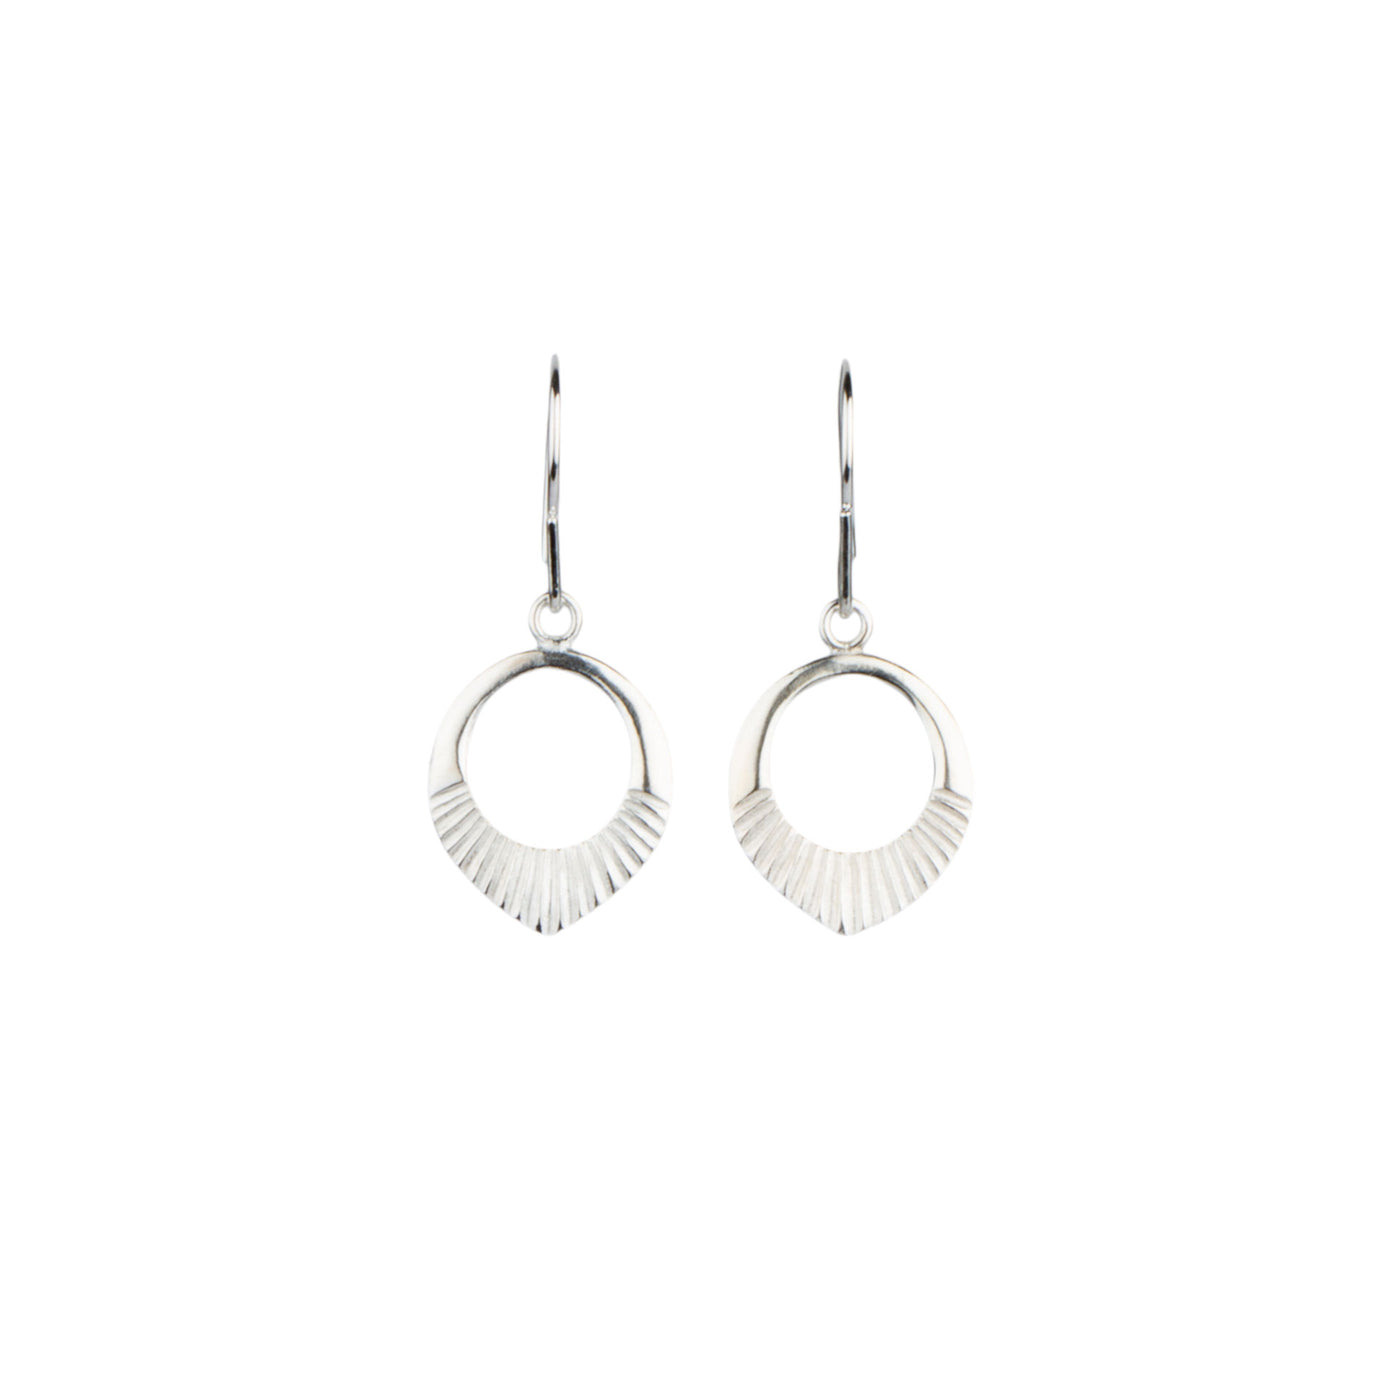 silver small open petal shape earrings with textured bottoms on a white background